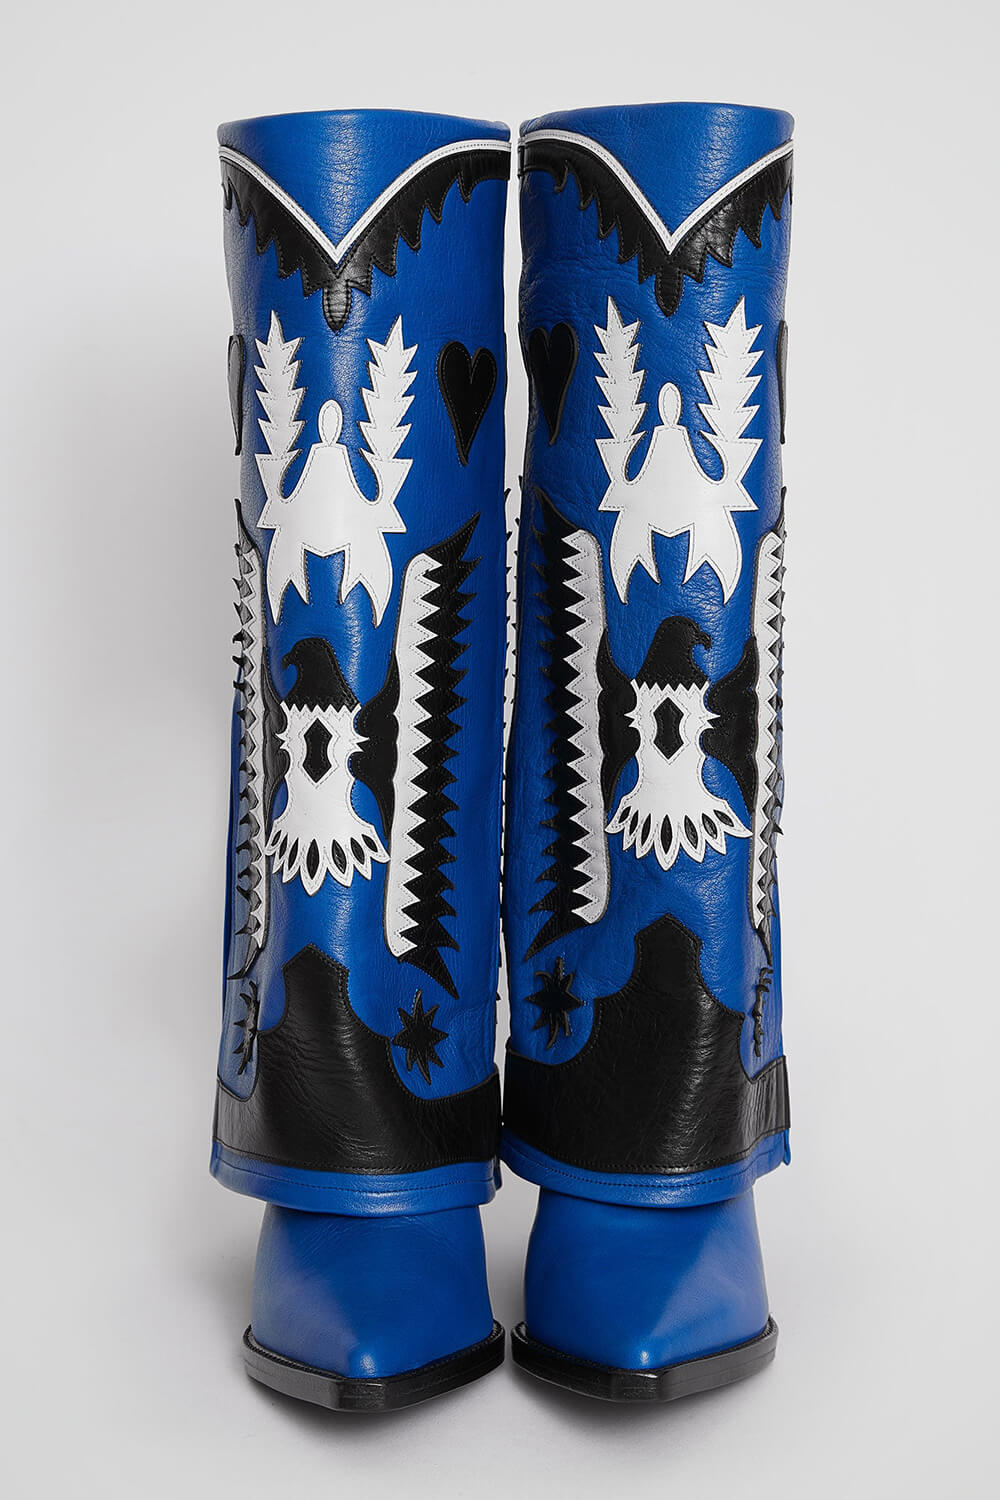 Western Cowboy Fold Over Pointed Toe Knee High Block Heel Boots - Blue